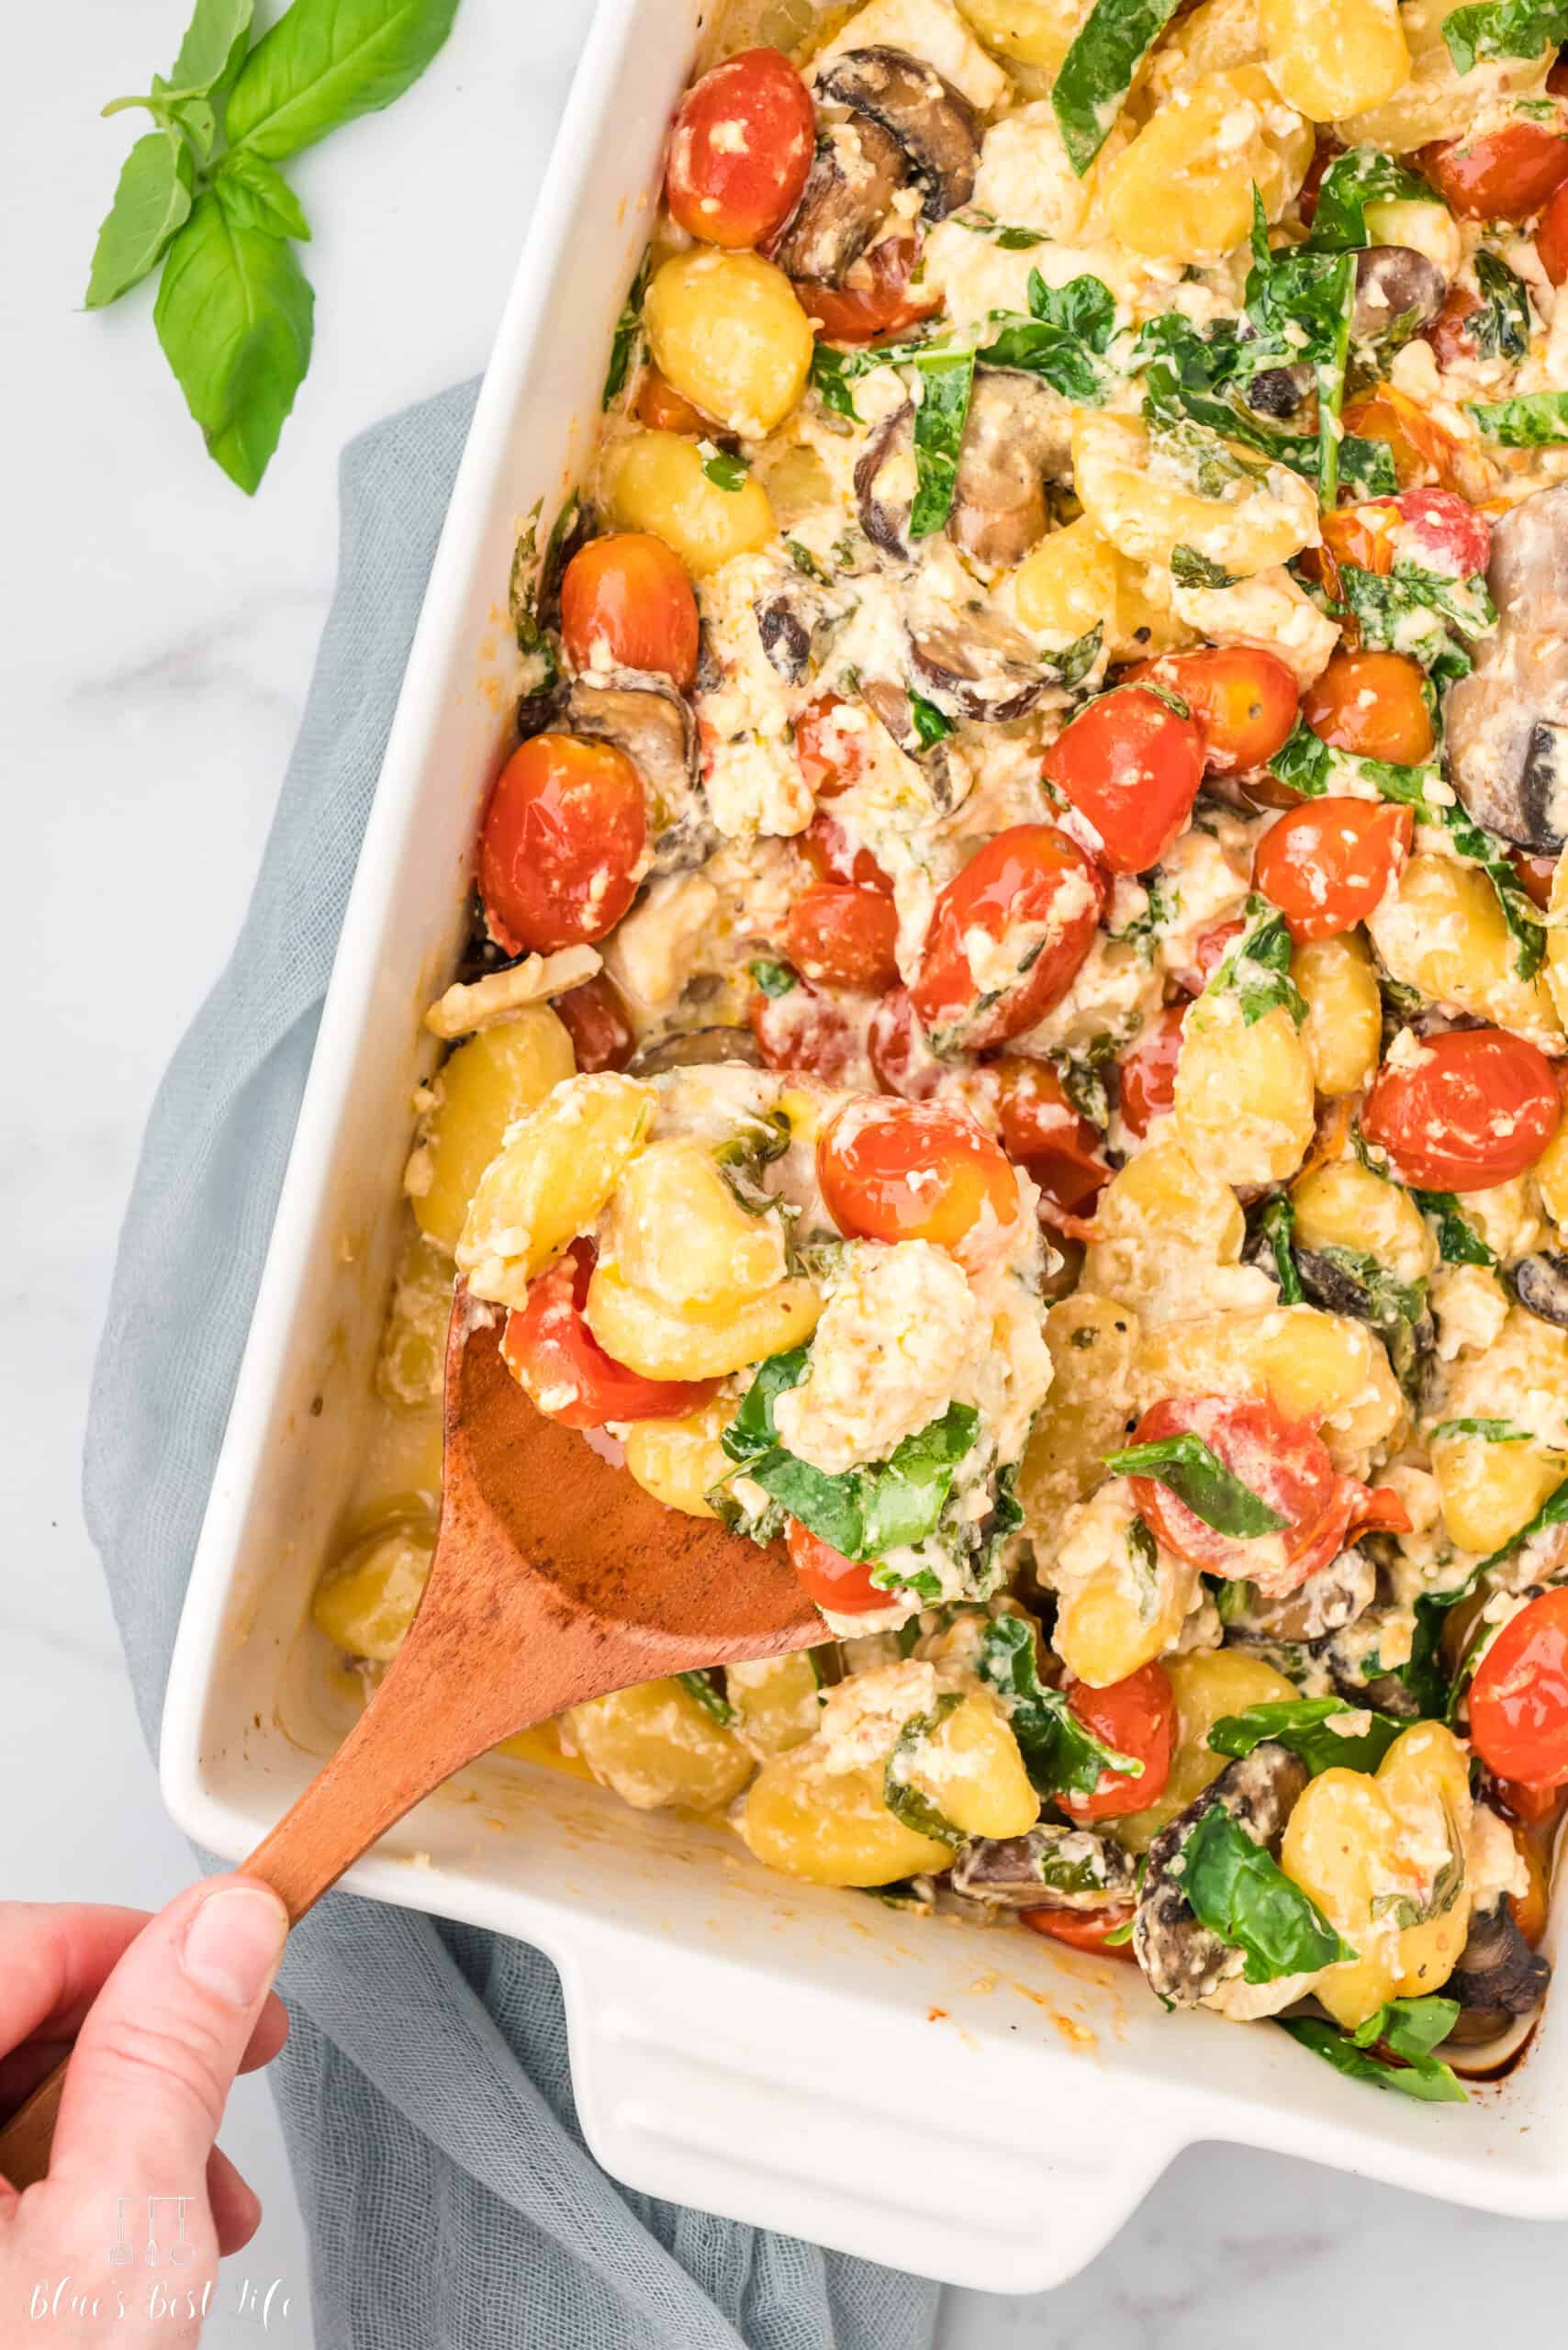 A baking dish with tomatoes, mushrooms, spinach and gnocchi with a creamy sauce.